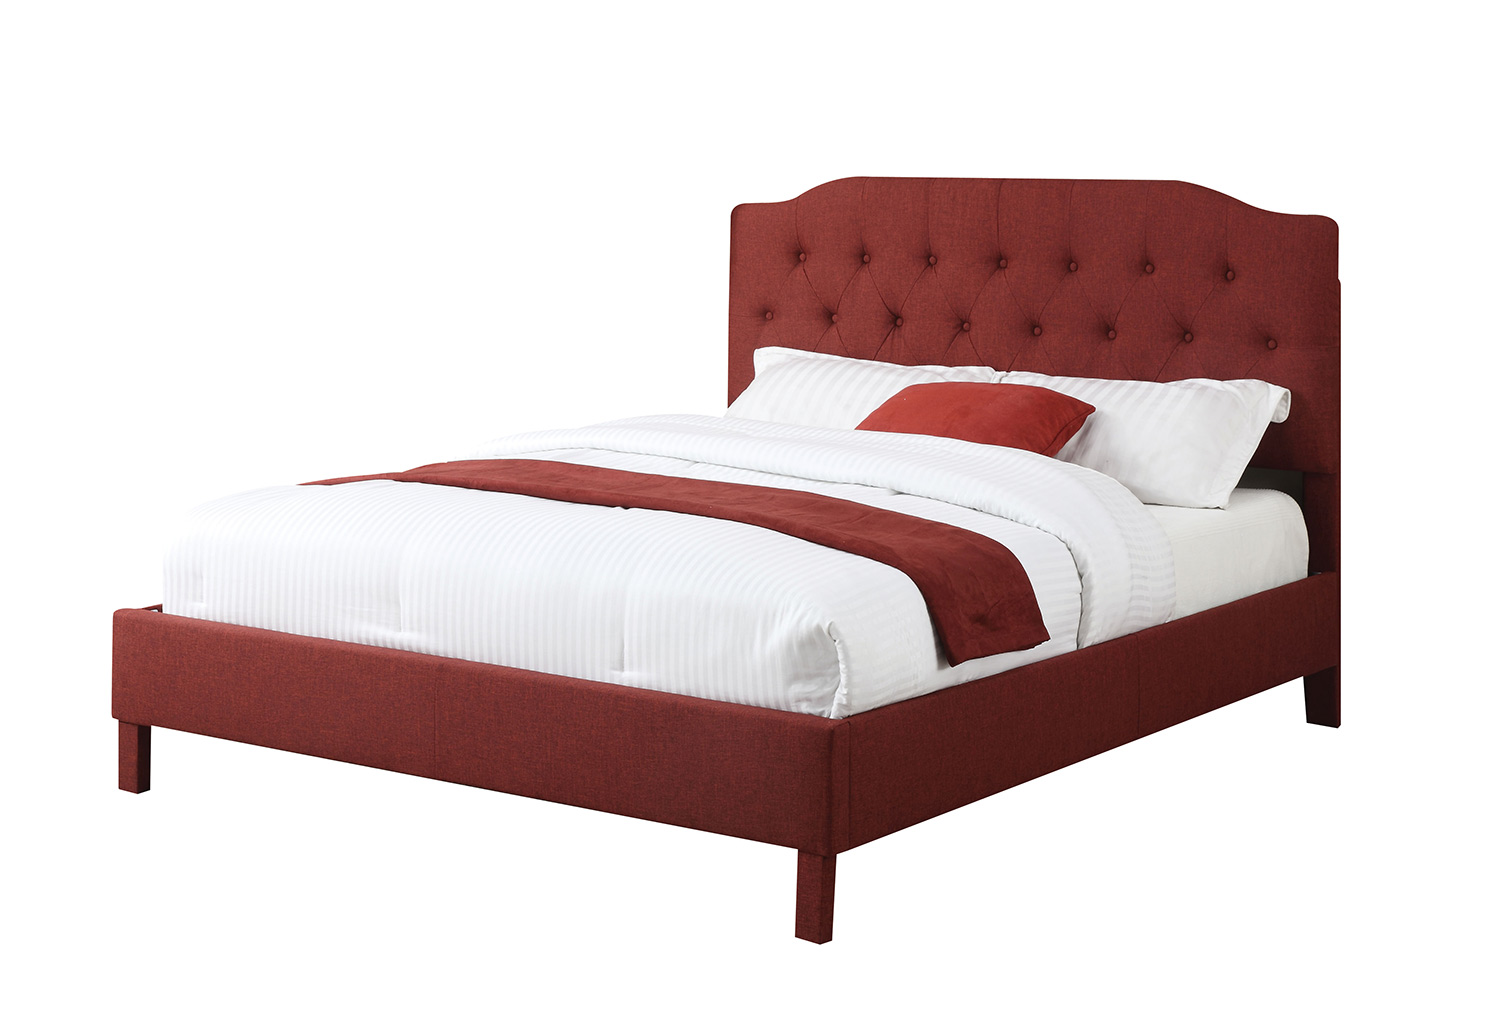 Acme Clive Bed - Red Linen